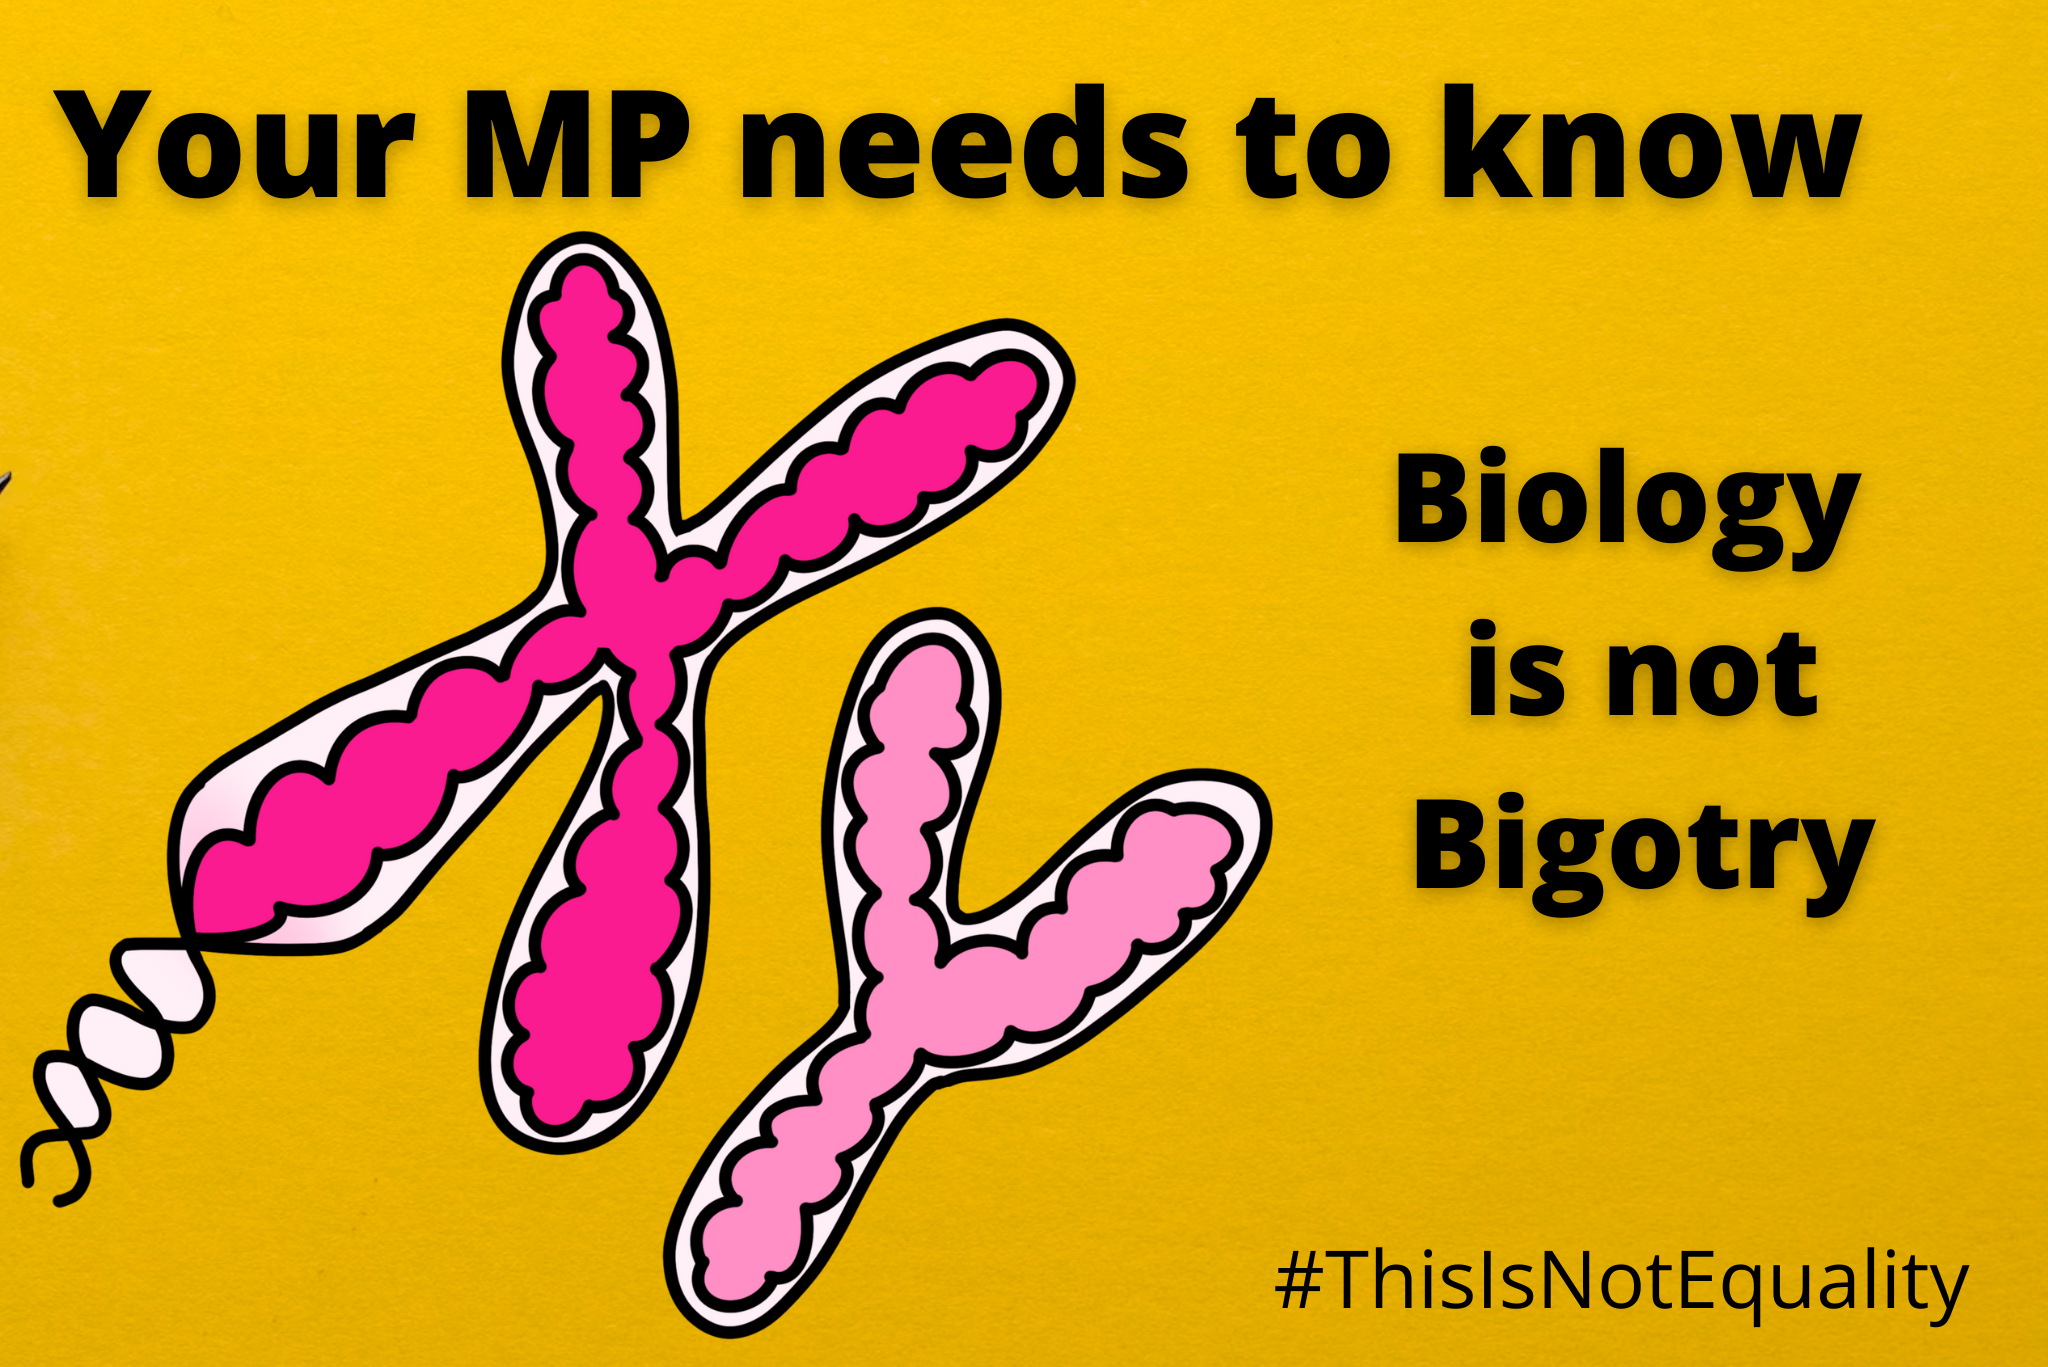 Tell your MP: Biology is not Bigotry